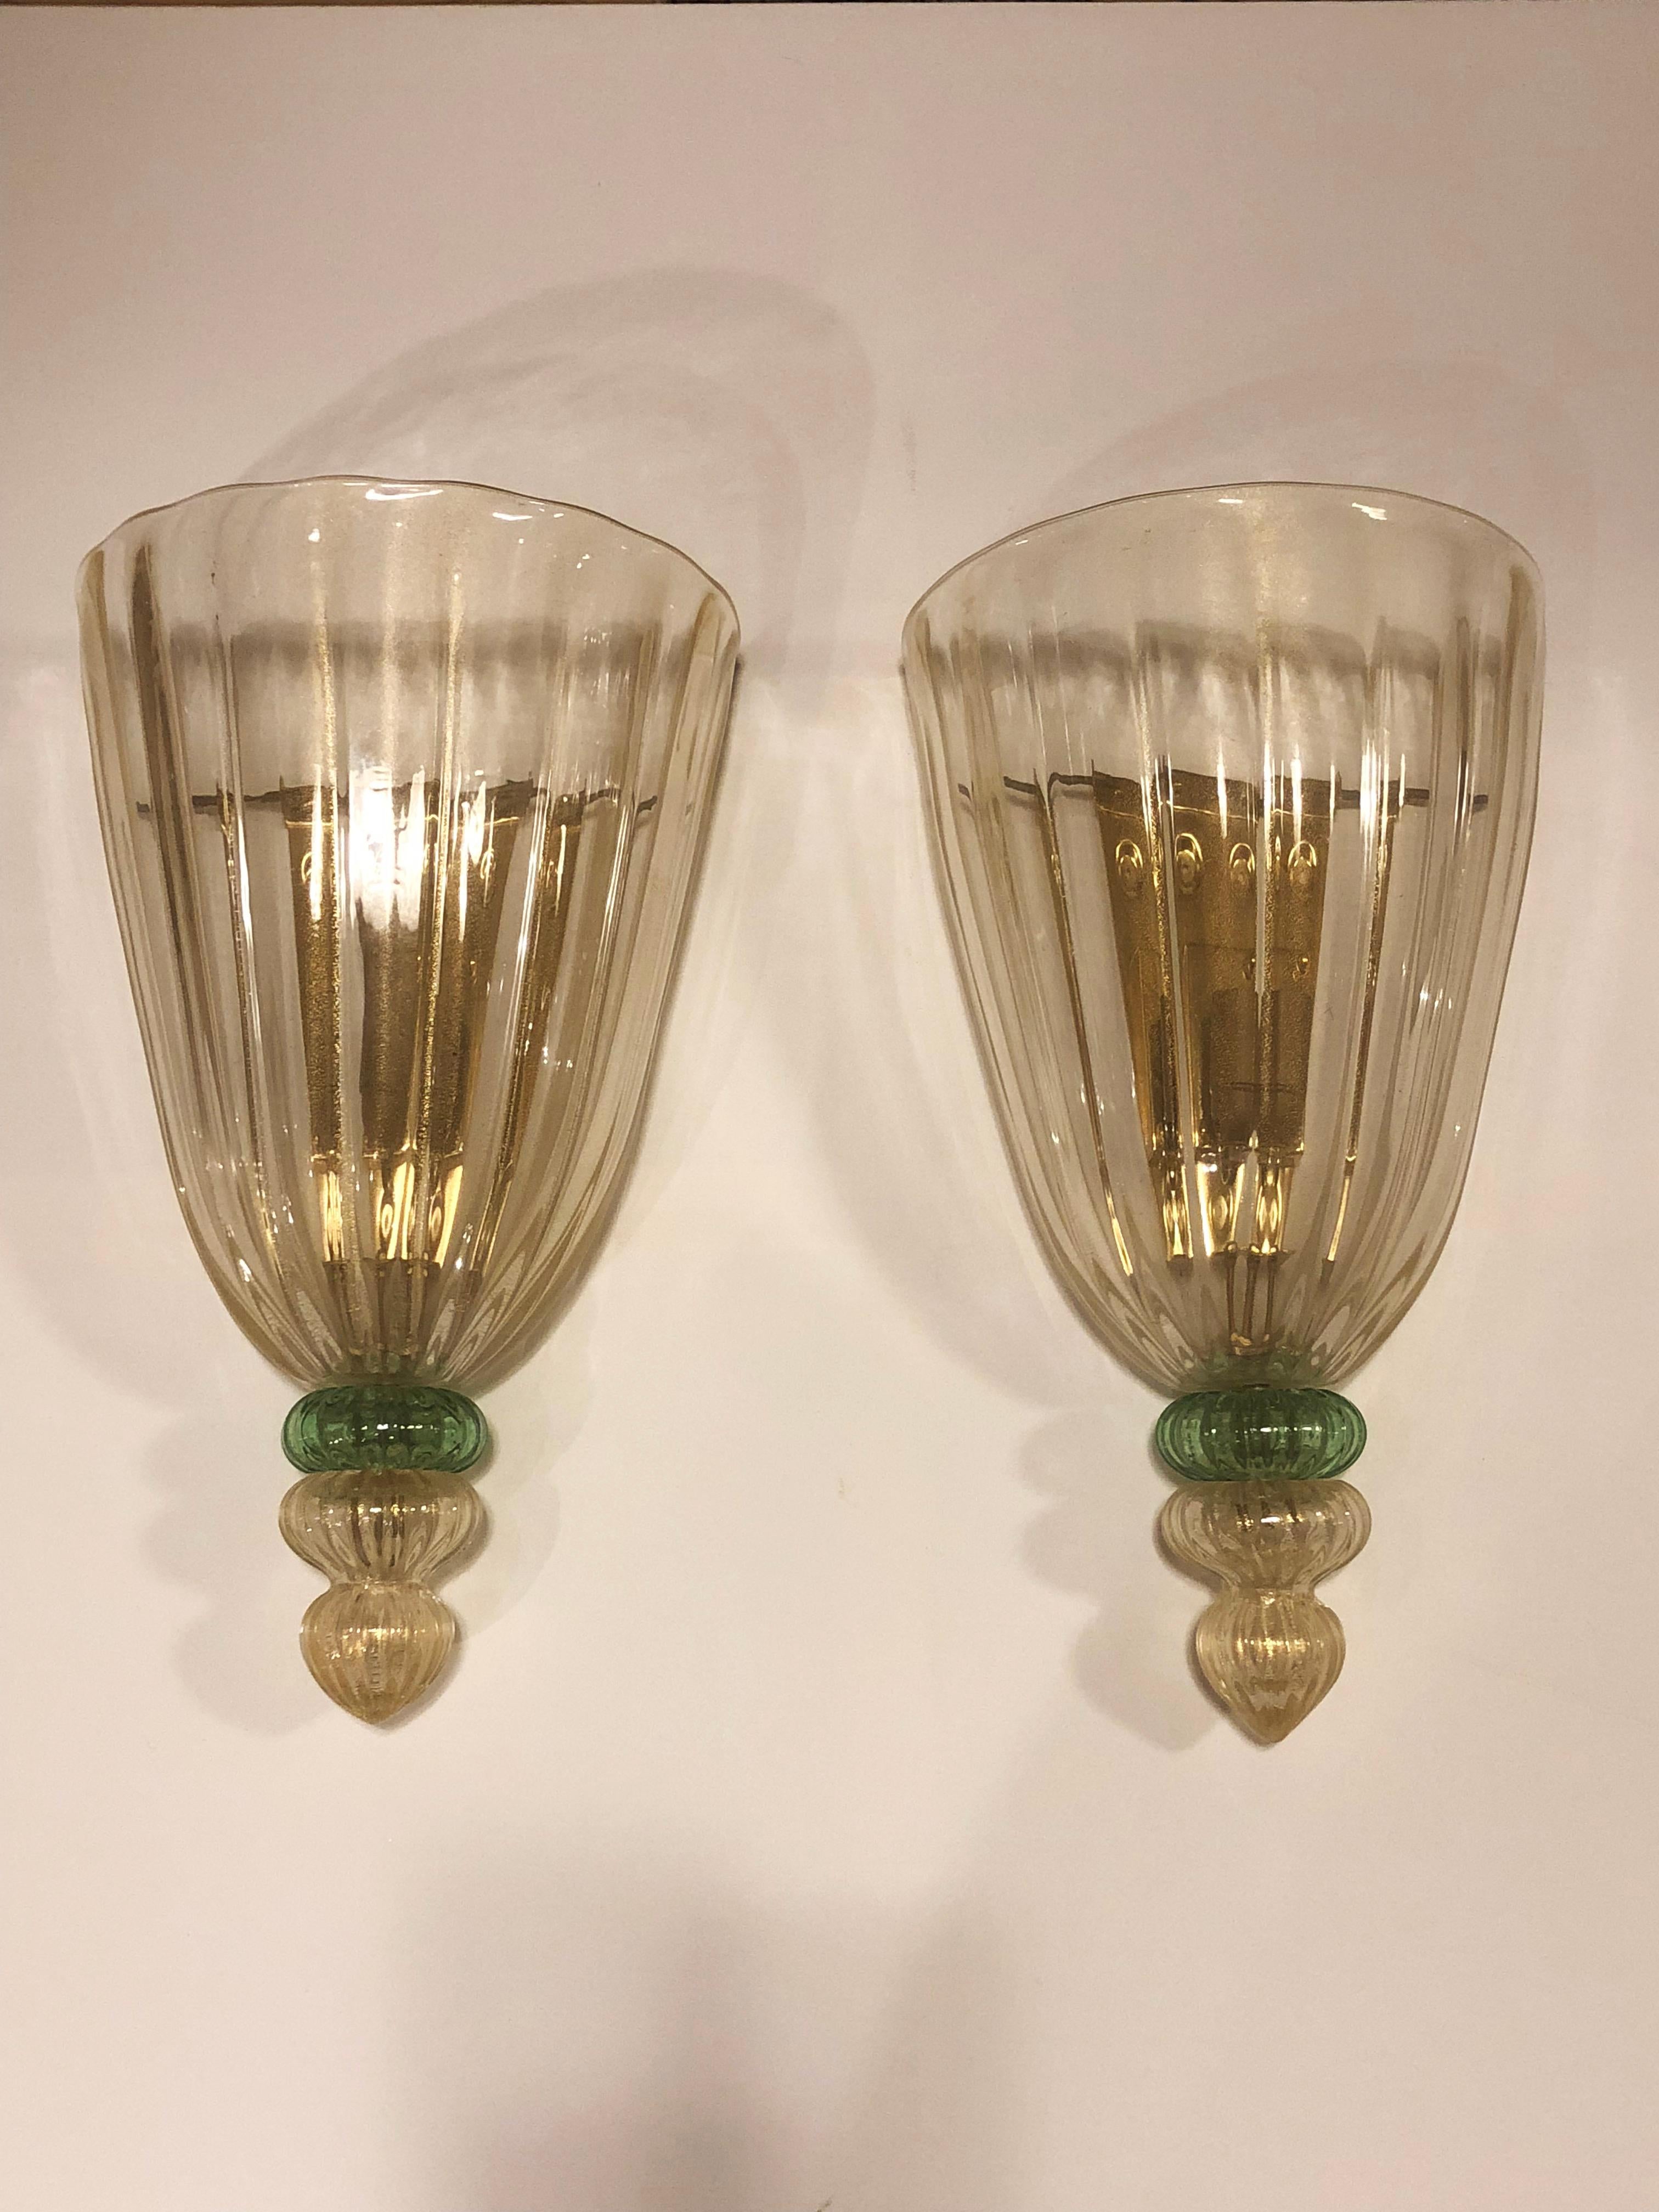 Pair of Barovier Fluted Glass Sconces In Excellent Condition For Sale In New York, NY